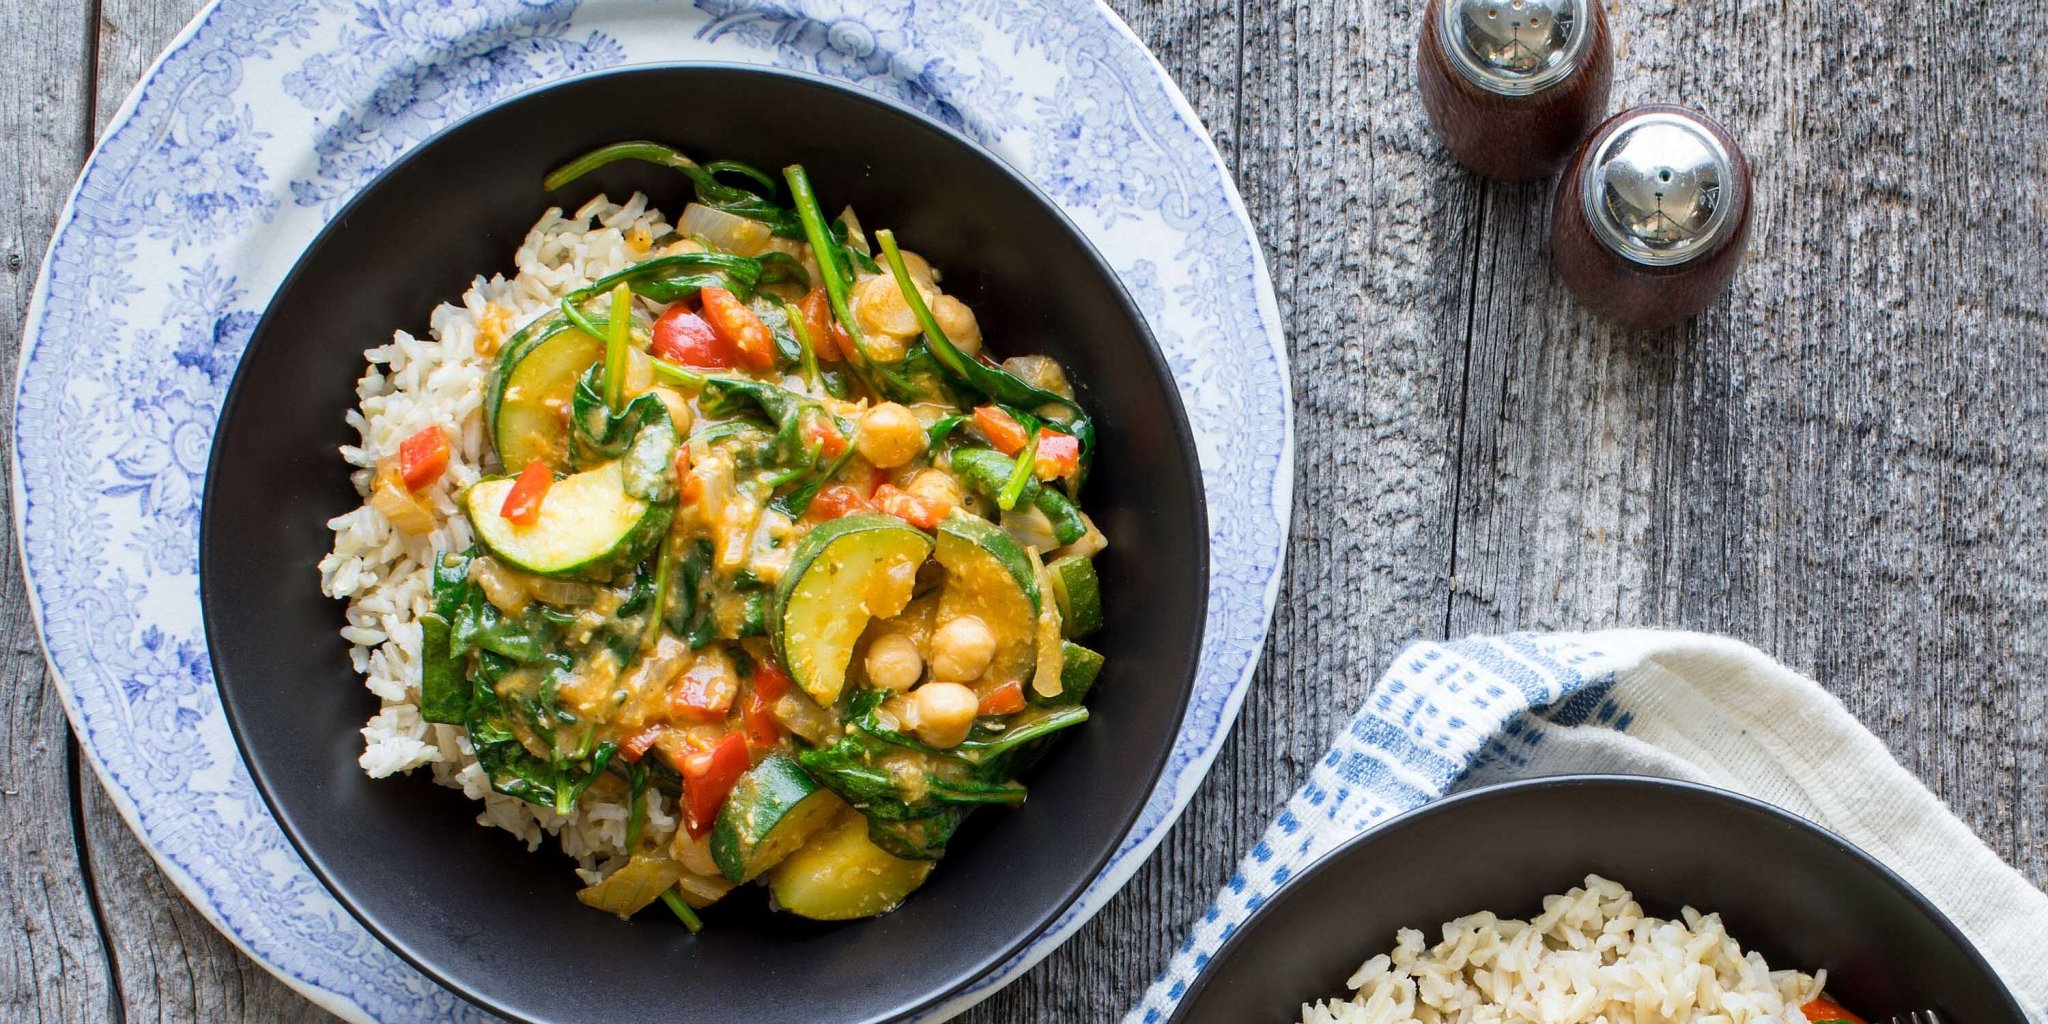 20 One-Pot Dinners You'll Want to Make Forever